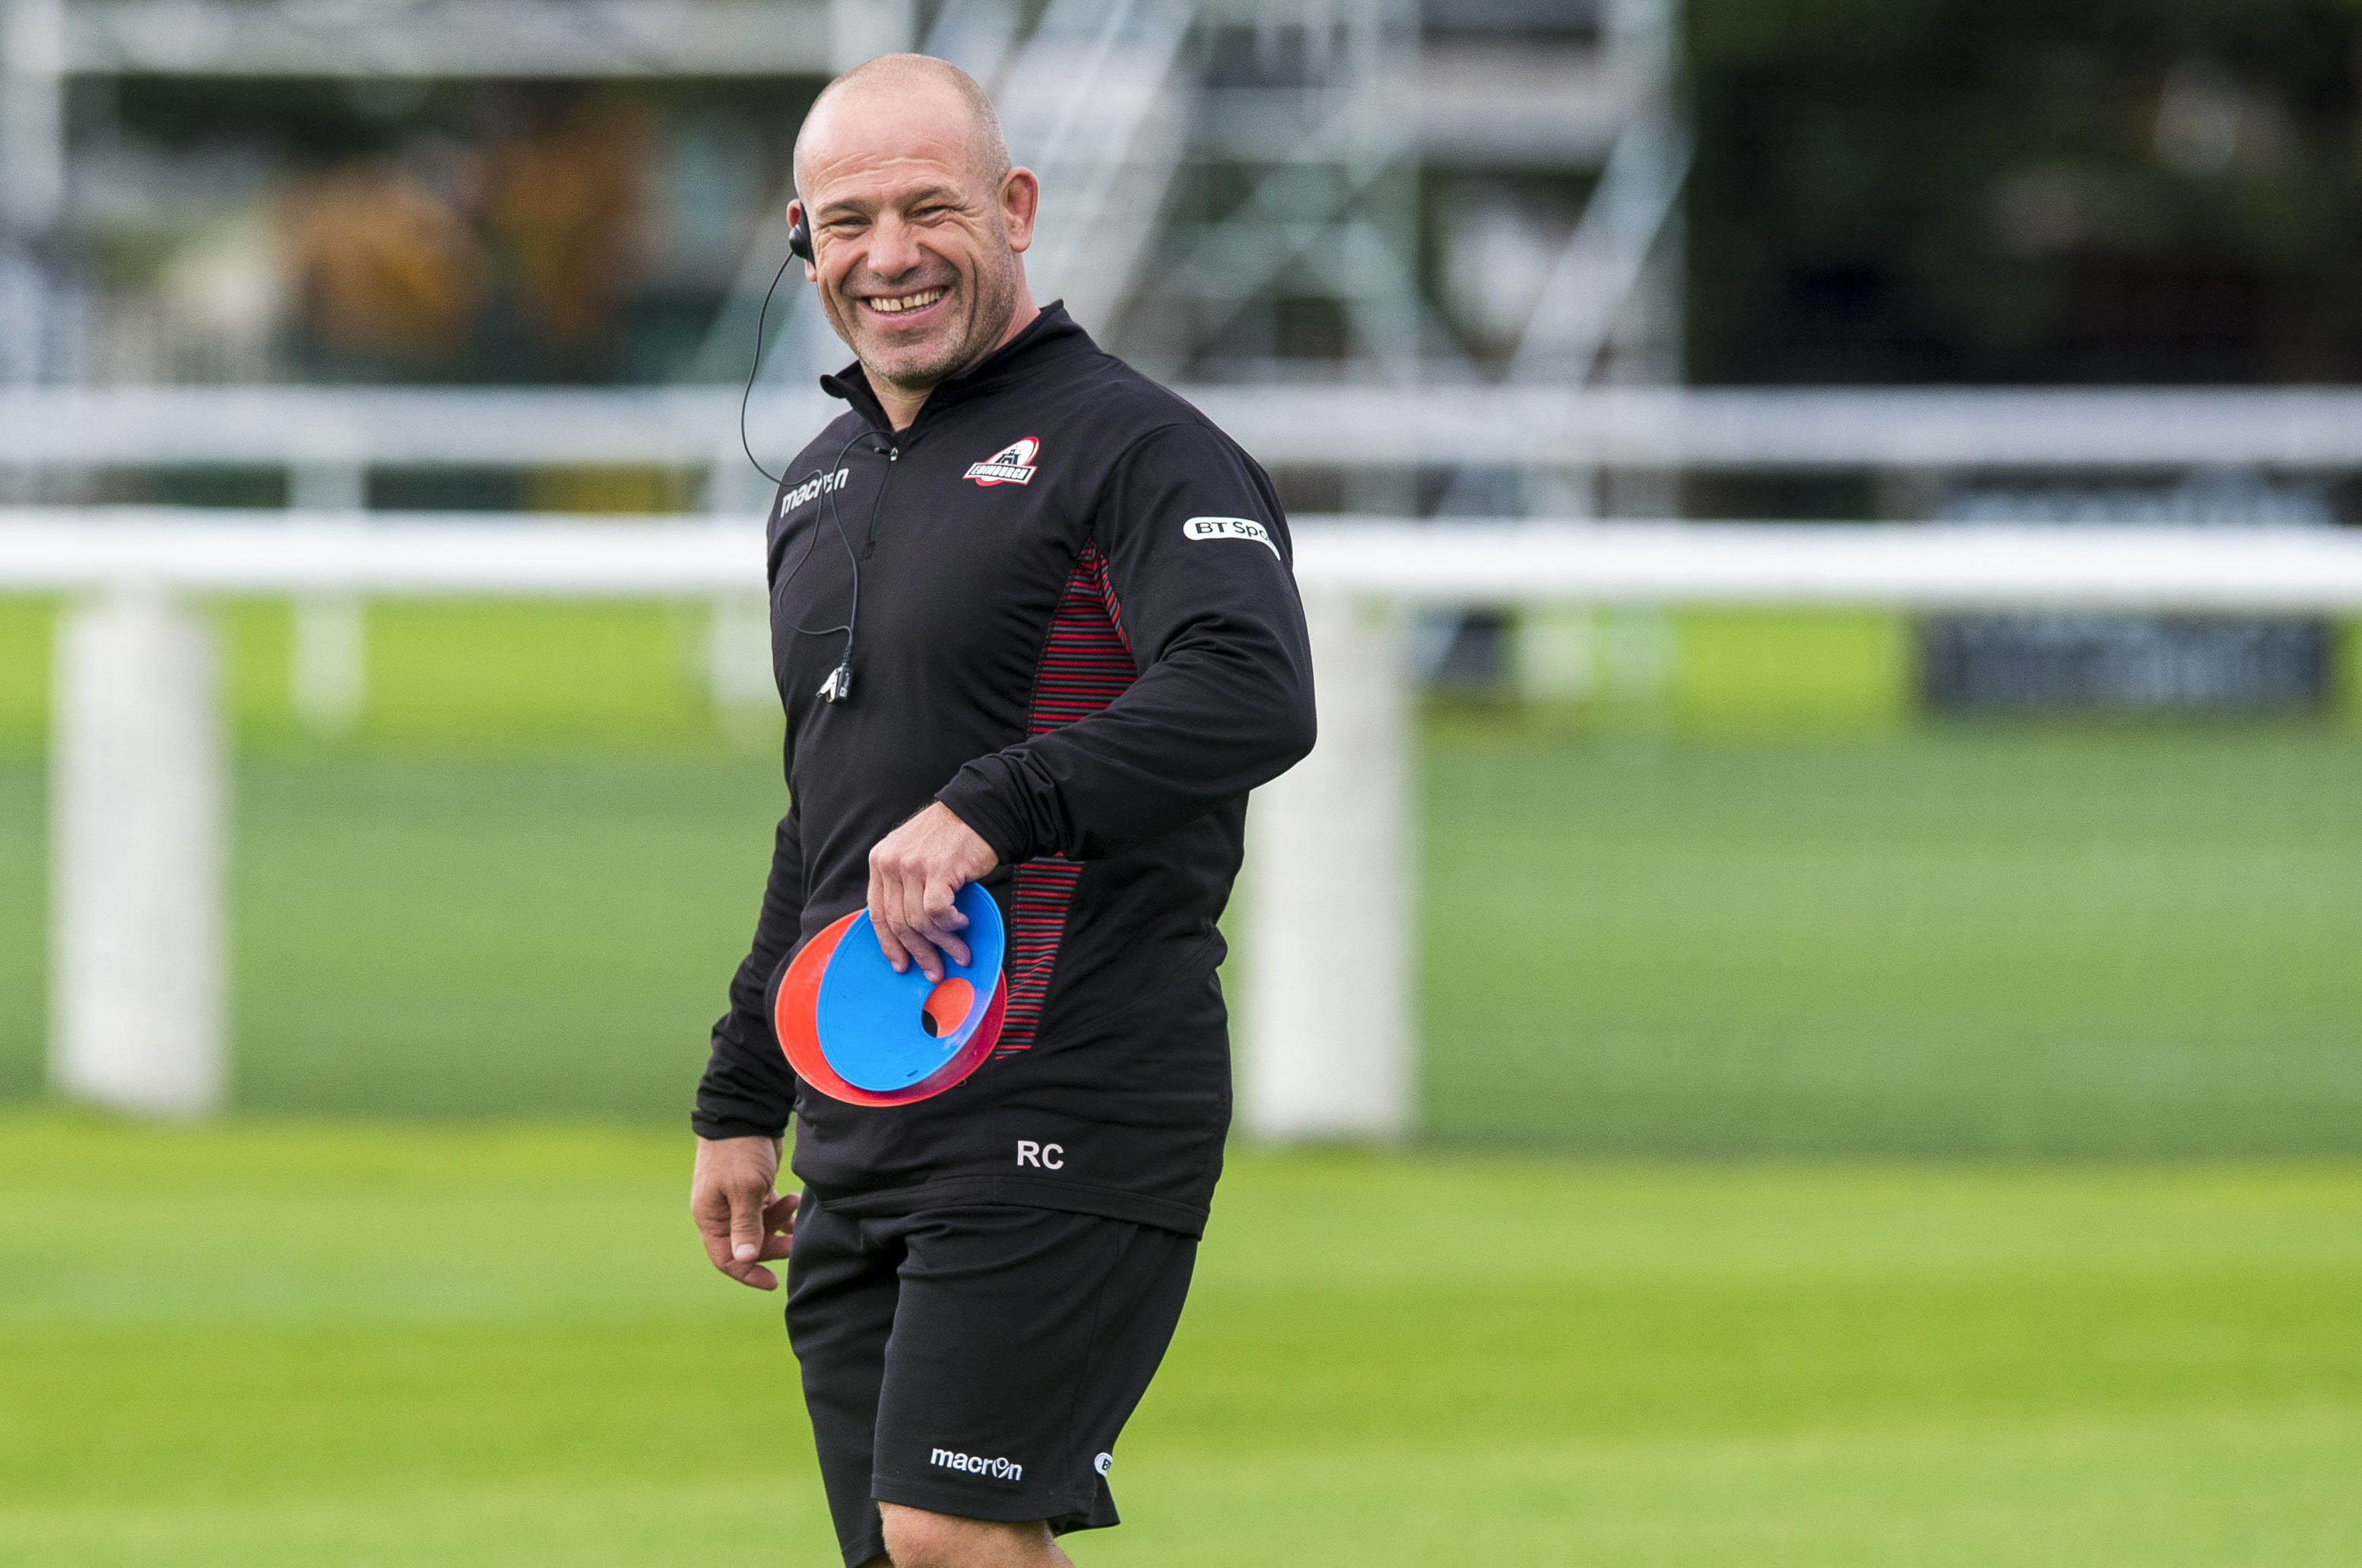 Edinburgh may be over-reliant of the effect of new head coach Richard Cockerill to turn their fortunes around.